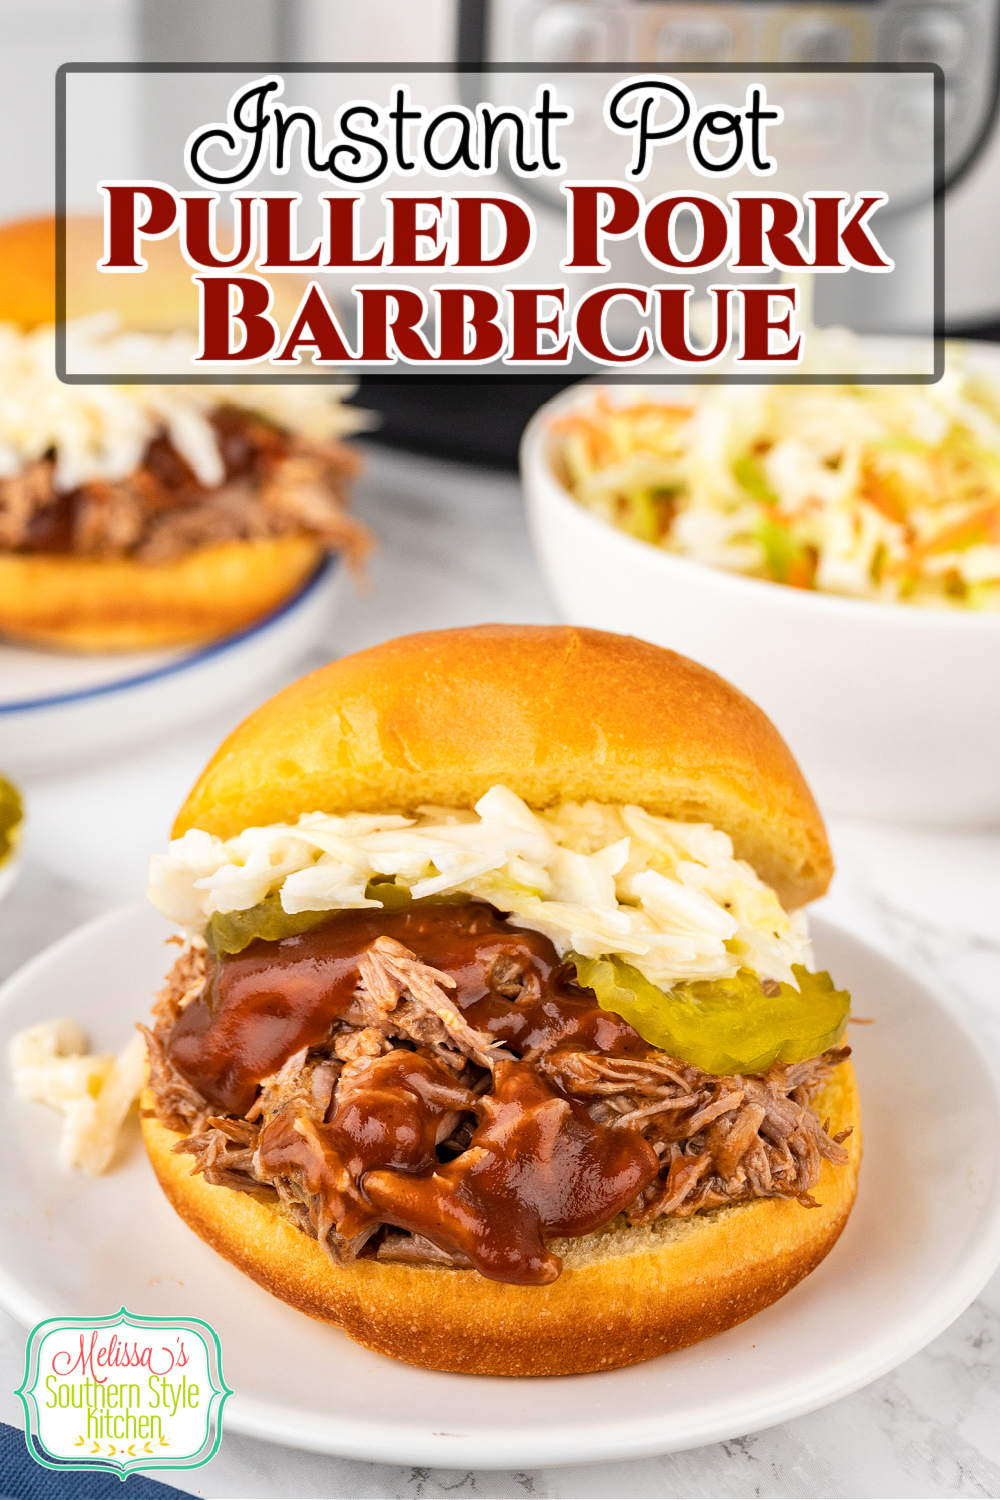 Cook this Pulled Pork in your Instant Pot for a tender and succulent barbecue feast #instantpot #instantpotrecipe #pulledpork #bestpulledpork #pulledporkrecipe #porkshoulder, #porkrecipes #choppedbarbecue via @melissasssk